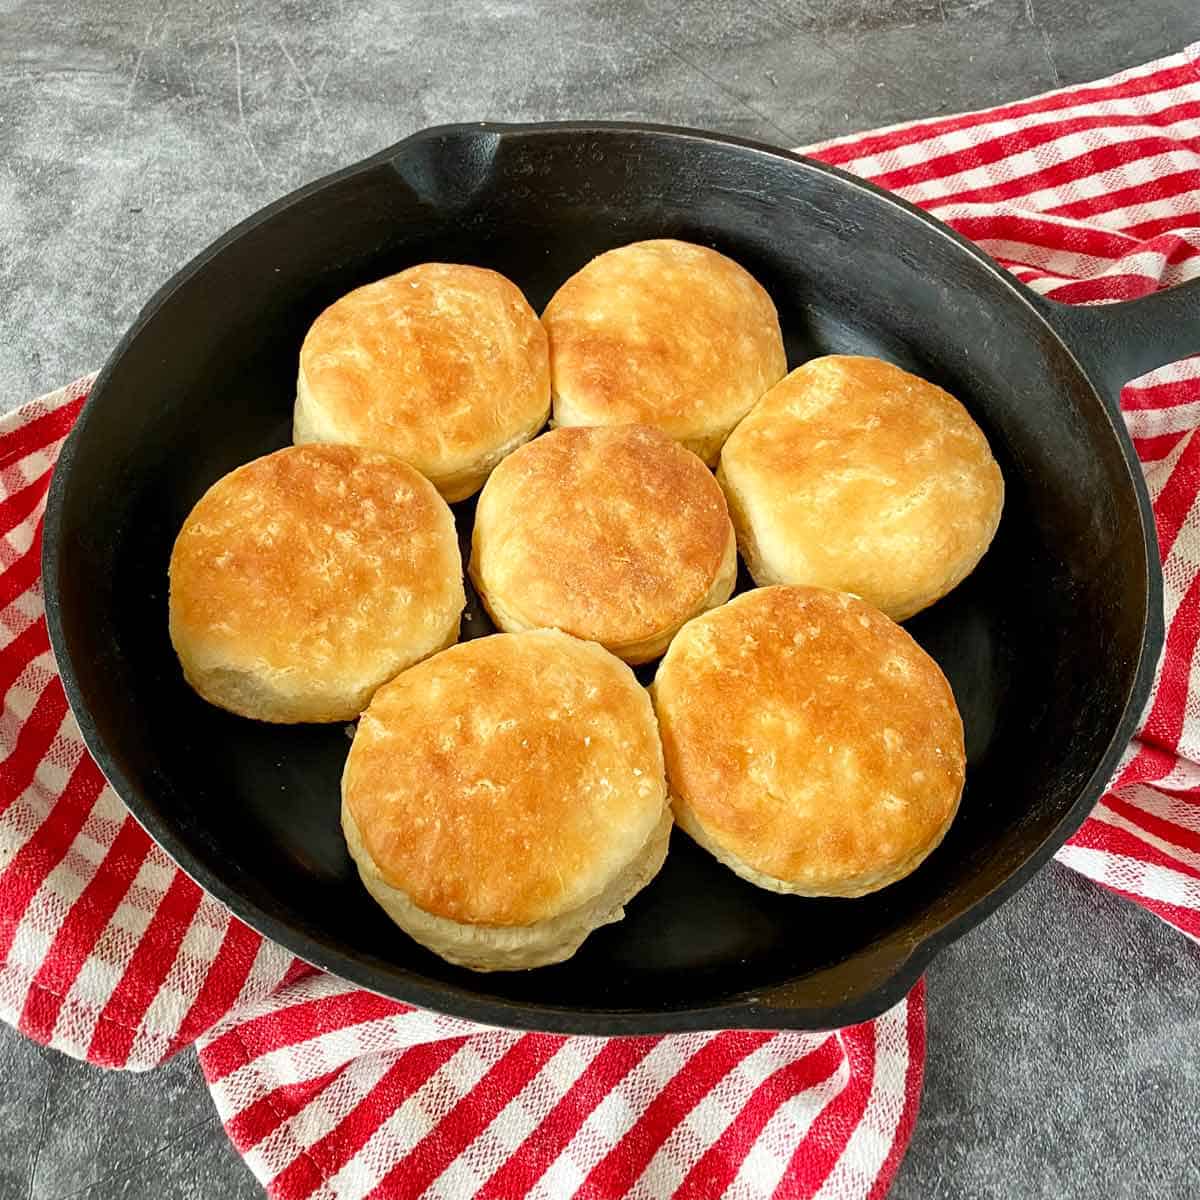 Golden brown homemade bacon grease biscuits in a cast iron skillet with a red and white dish towel.